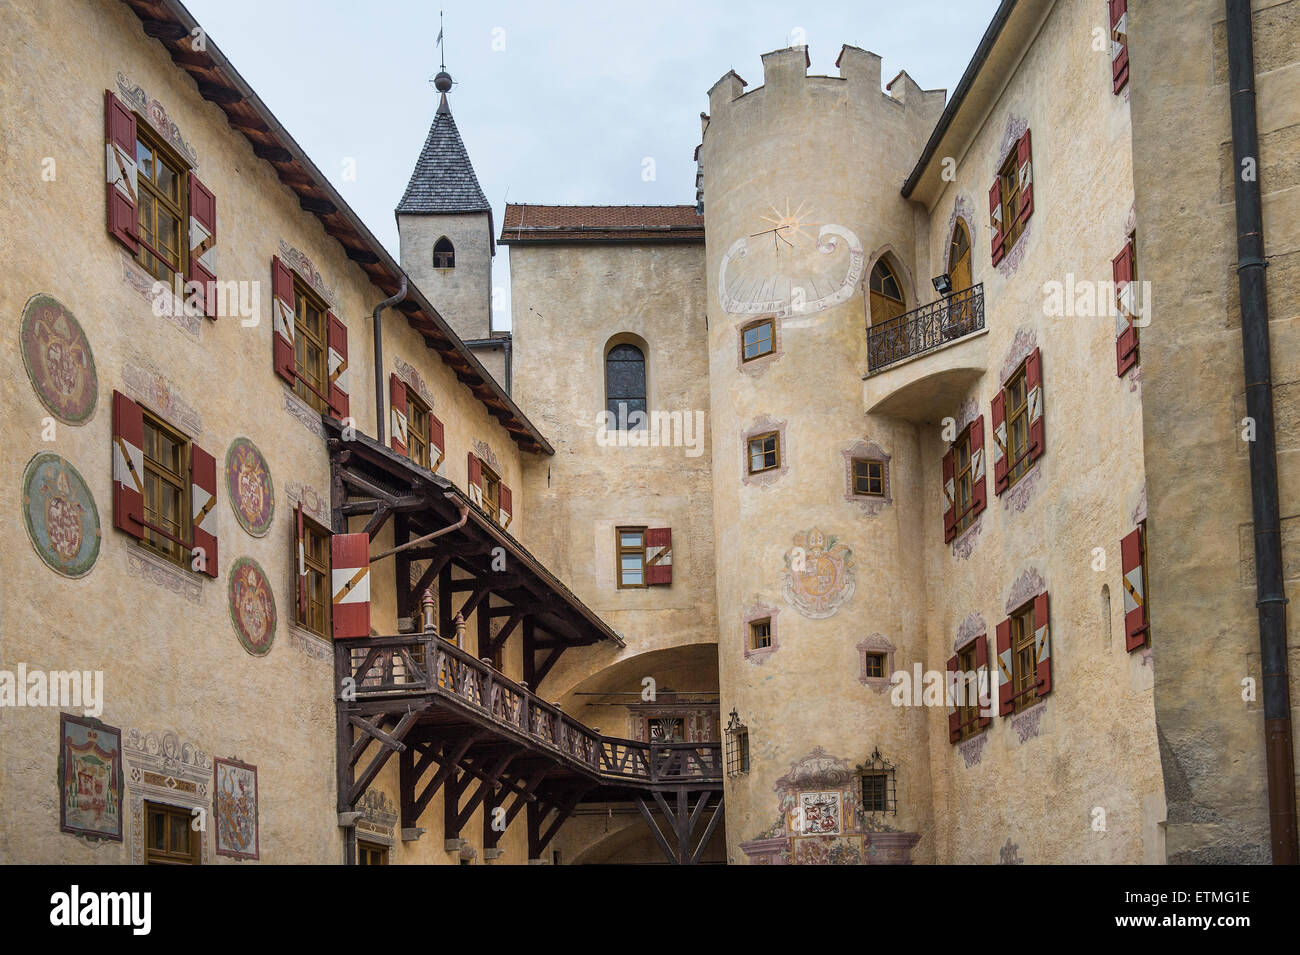 Courtyard, Messner Mountain Museum, MMM Ripa in Brunico Castle, Bruneck, South Tyrol, Italy Stock Photo